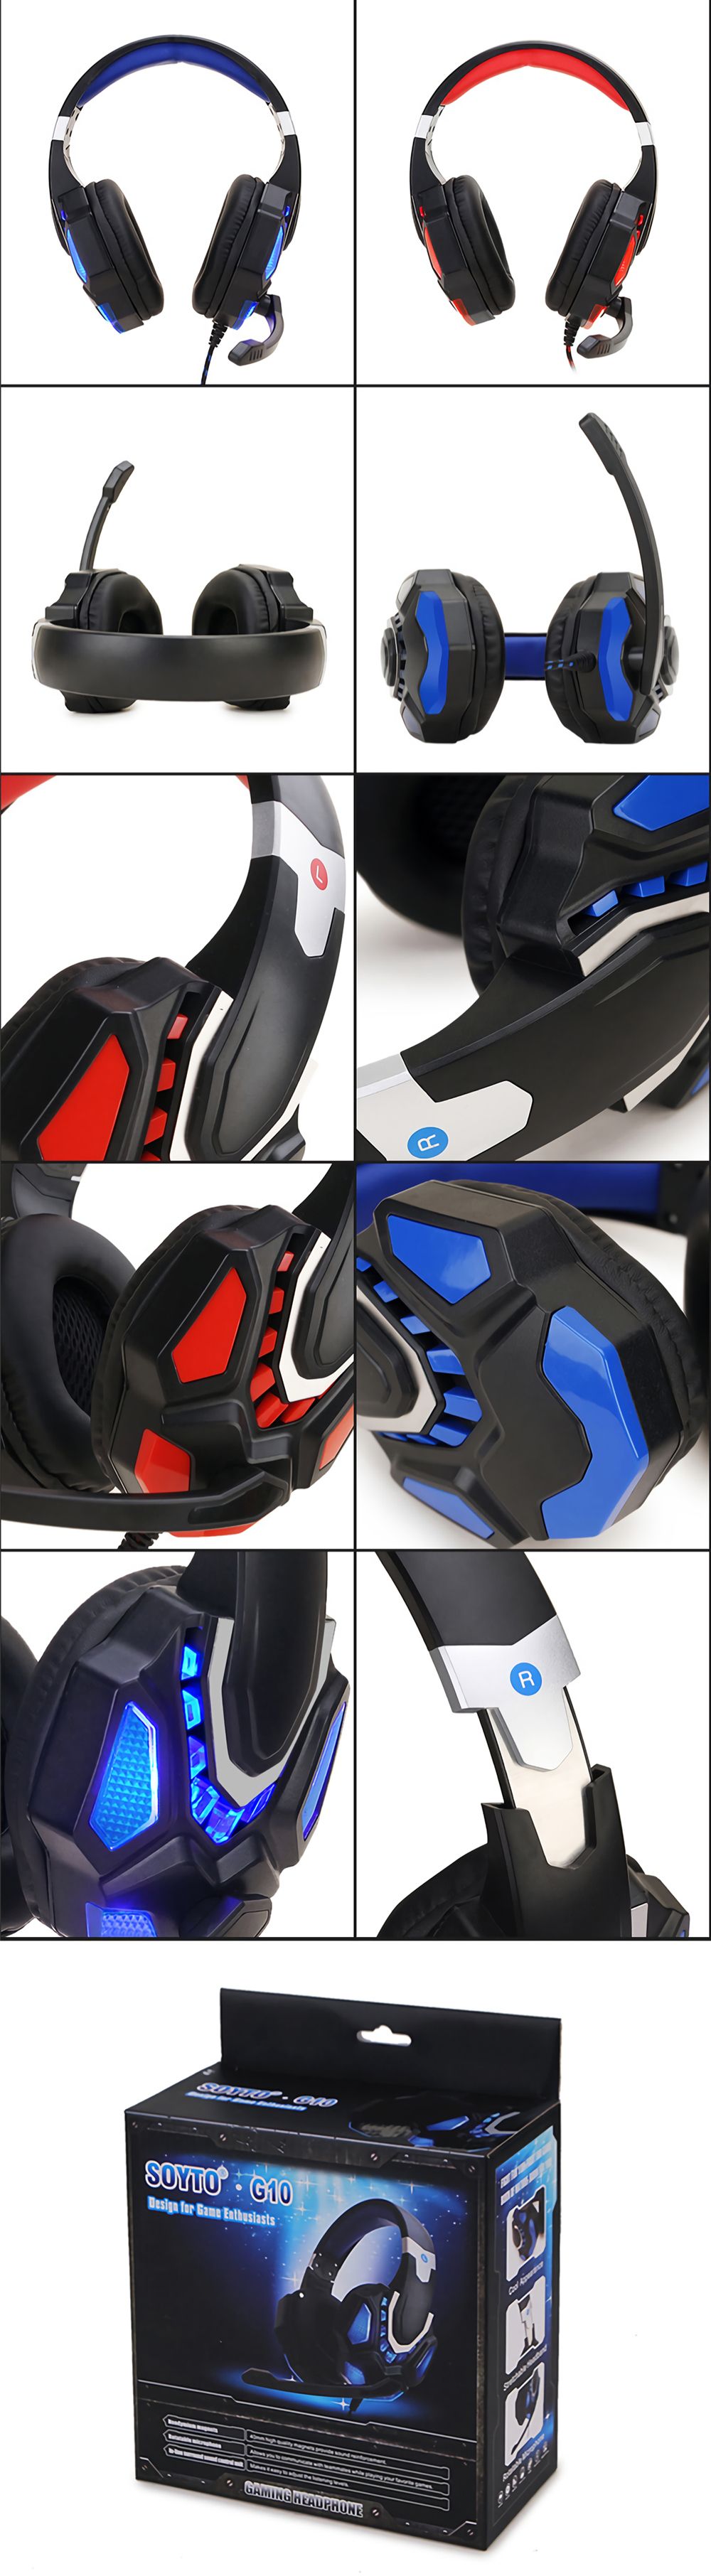 Soyto-Game-Headphone-35mm-Wired-Bass-Gaming-Headset-Stereo-Surround-Sound-Headphones-with-Mic-for-Co-1696219